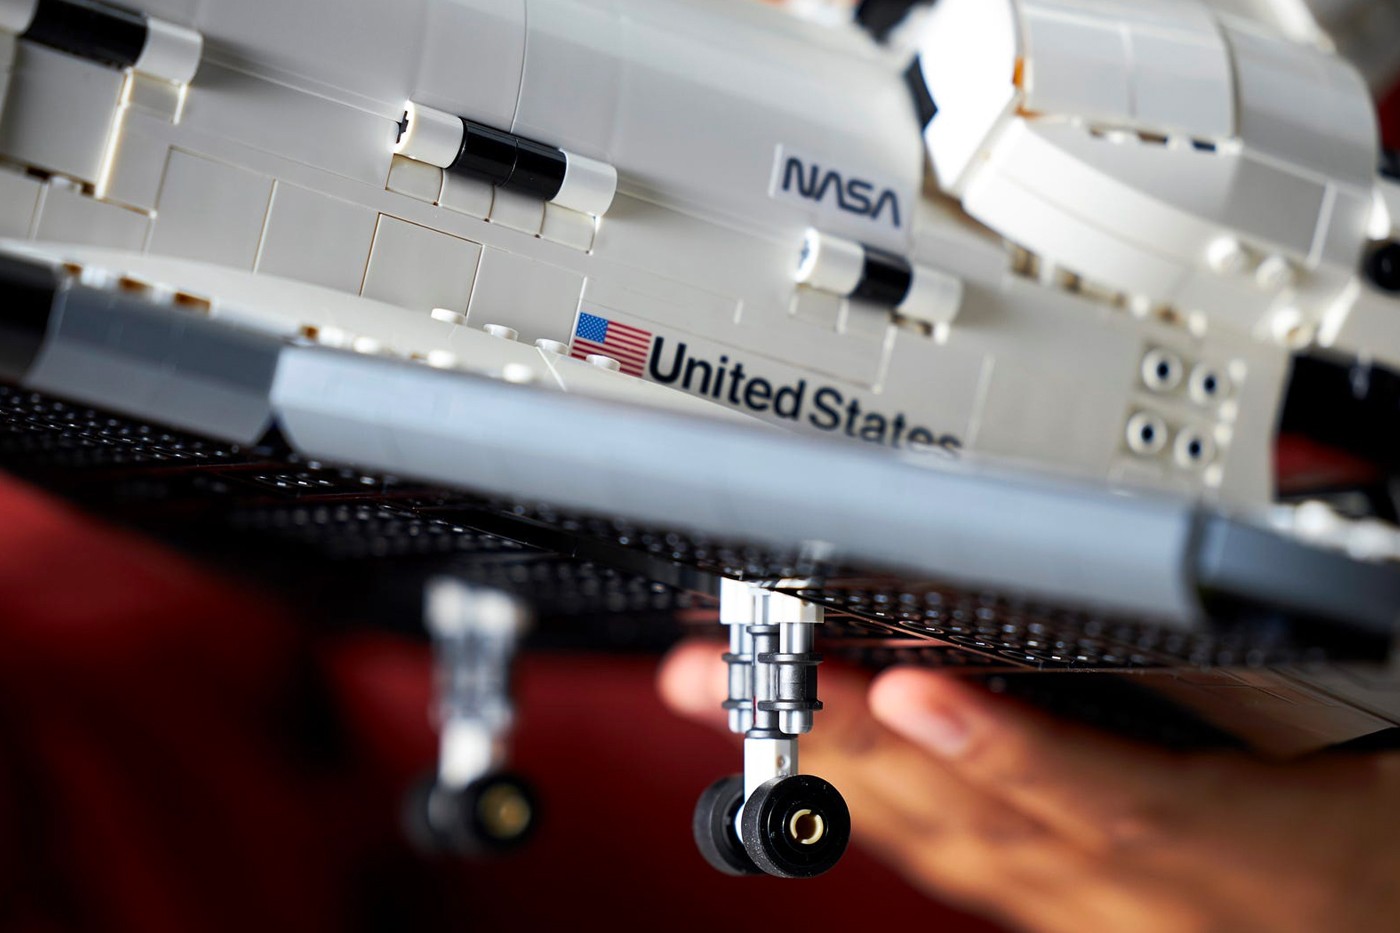 NASA x LEGO release 2,354-piece Space Shuttle Discovery Kit